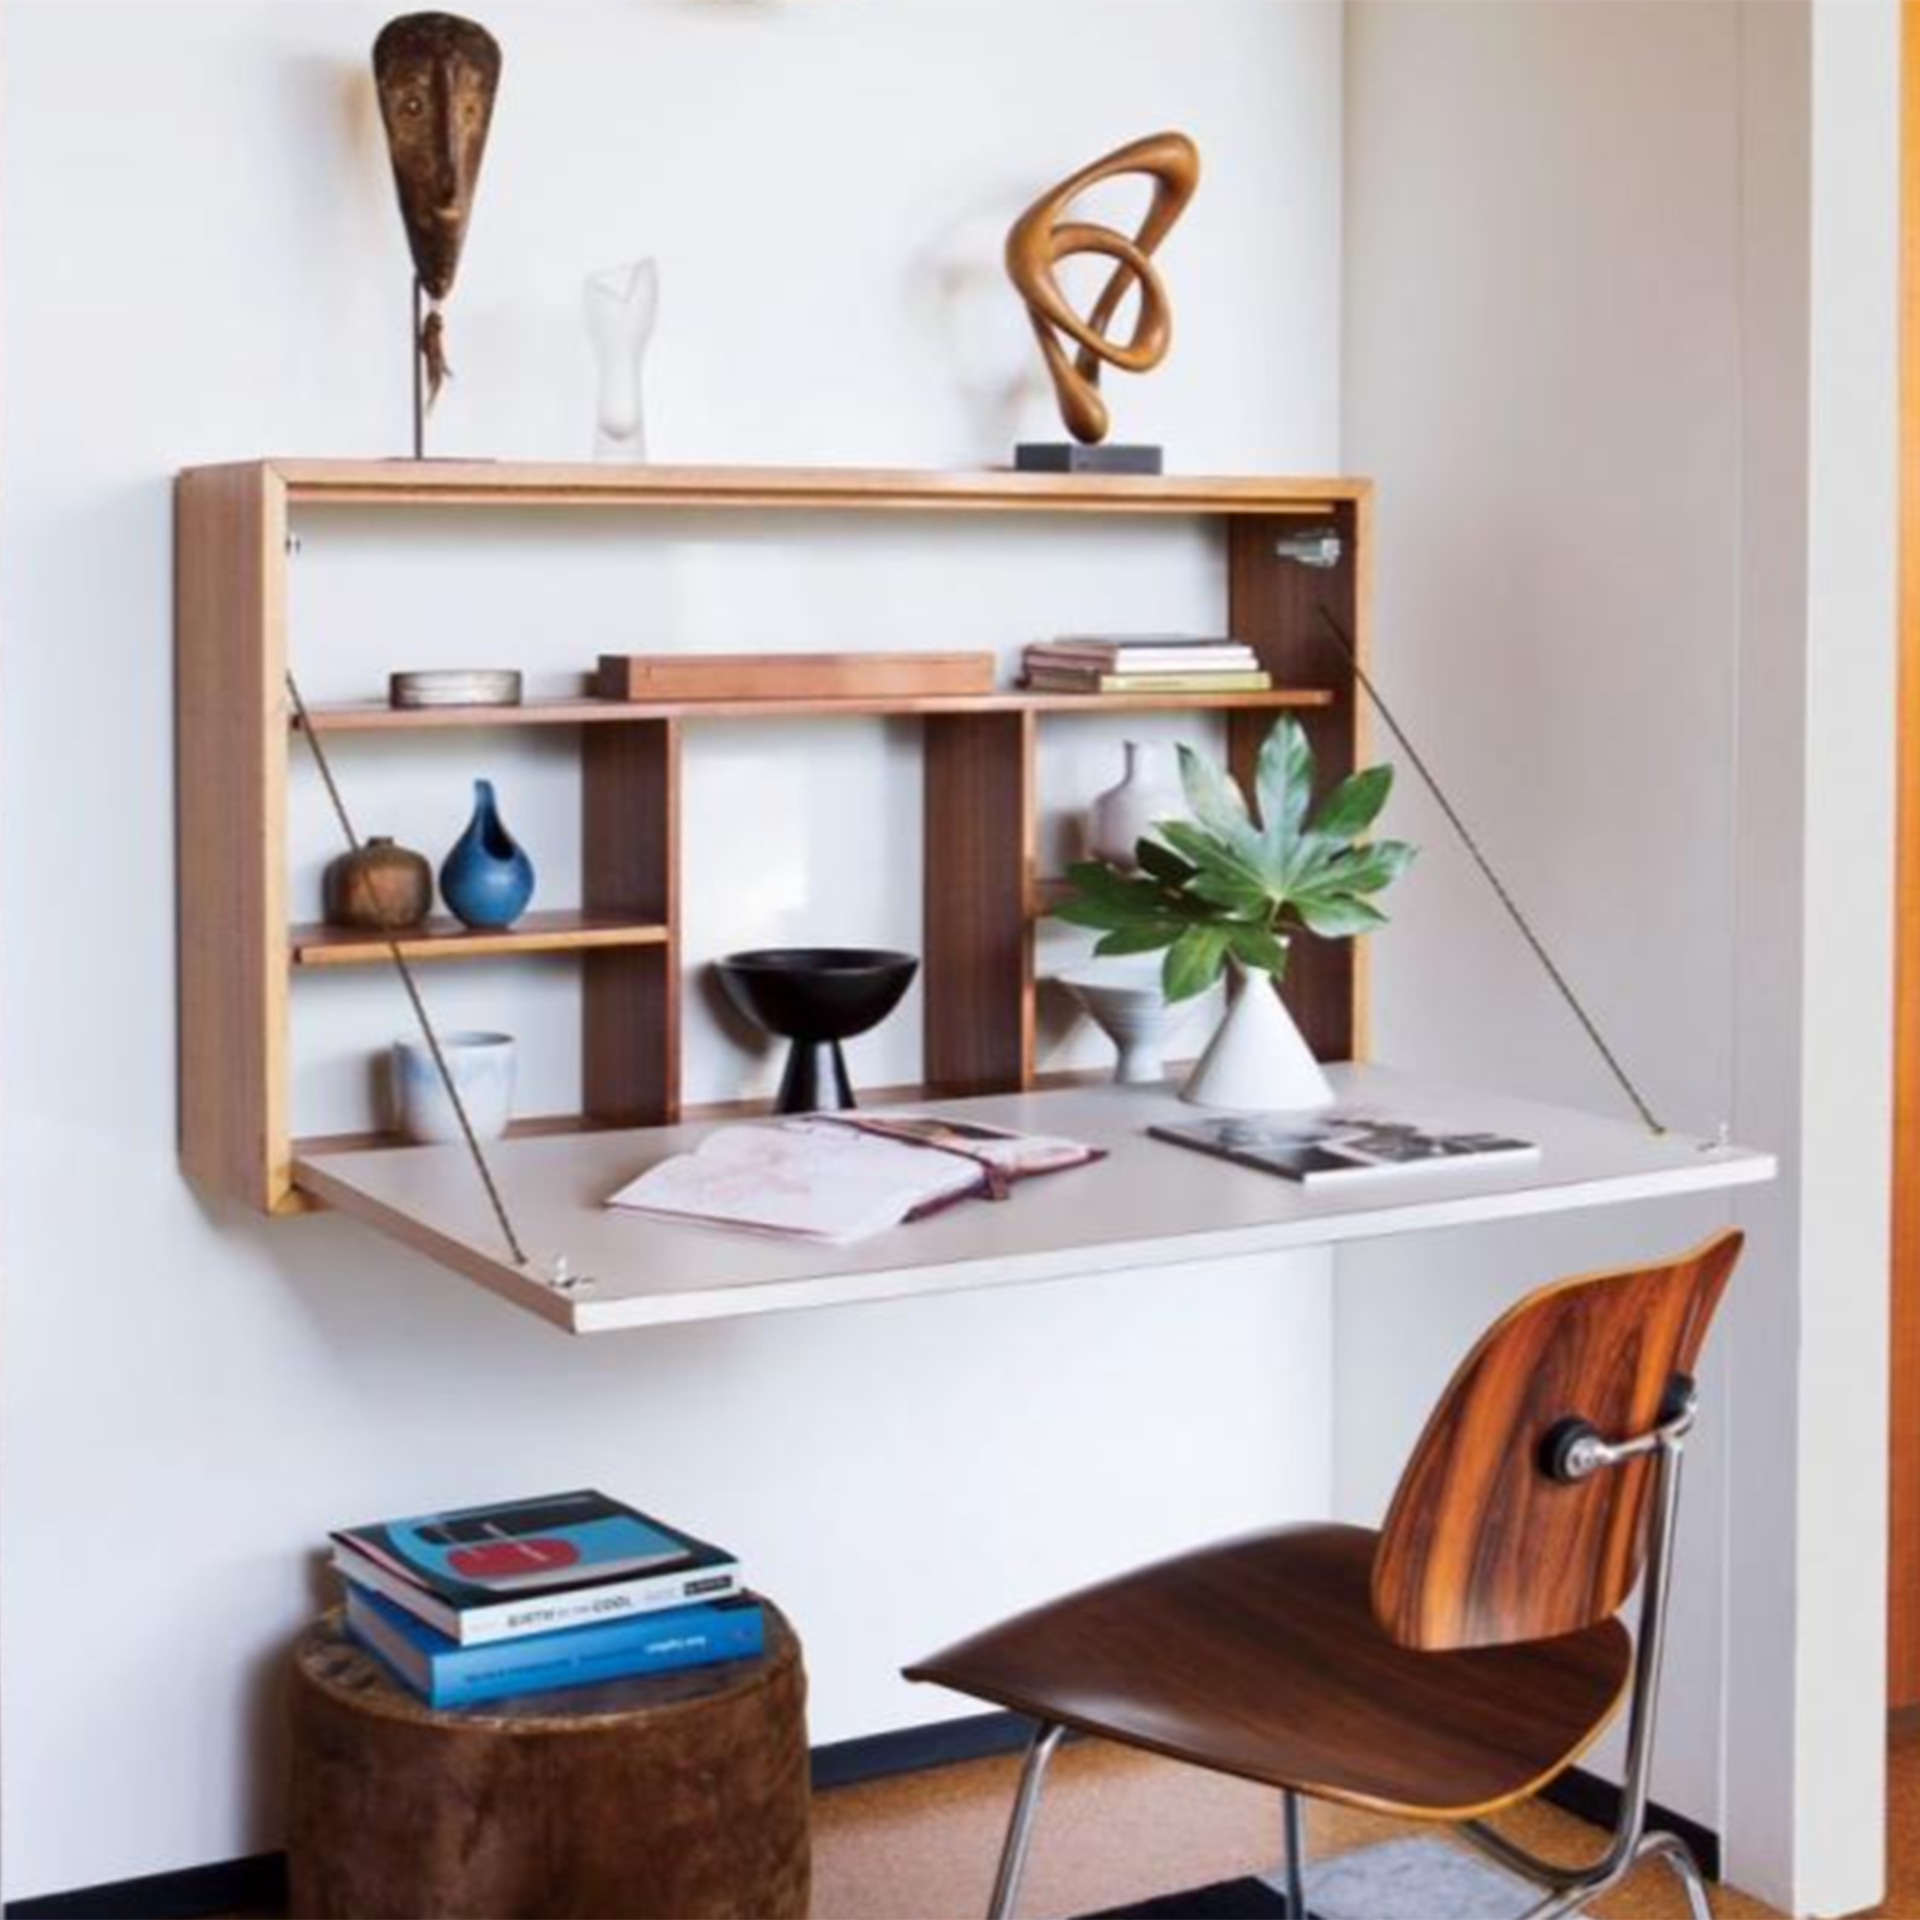 Interior design trends that are here to stay | Fold Down Desk